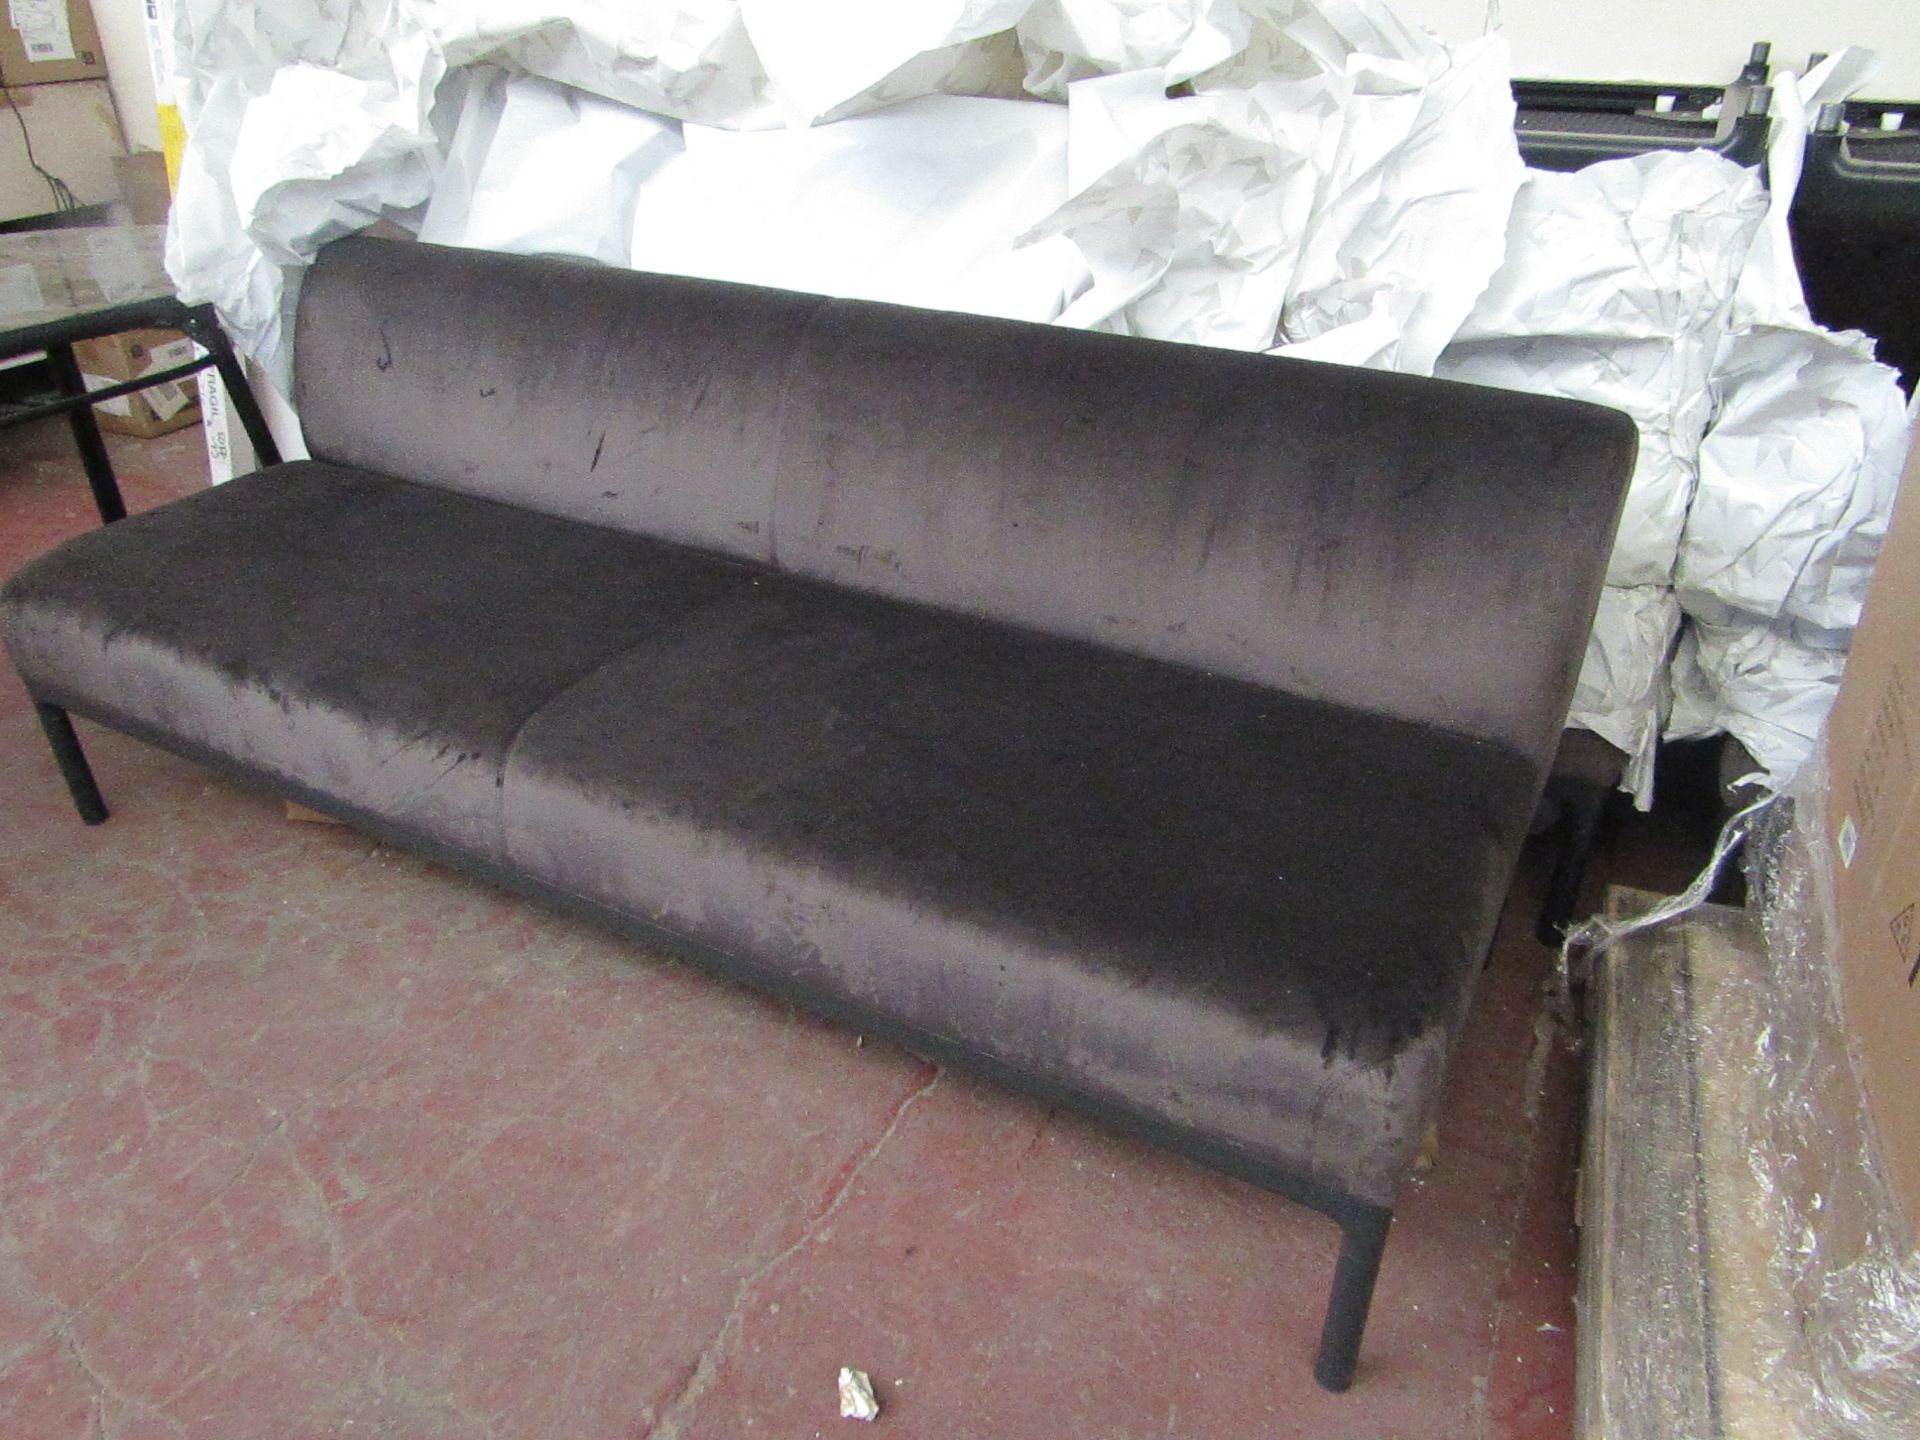 | 1 X | PERASON LLOYD EDGE BENCH | SOFA CUSHION IS IN GOOD CONITION BUT THERE MAY BE SMALL MINOR